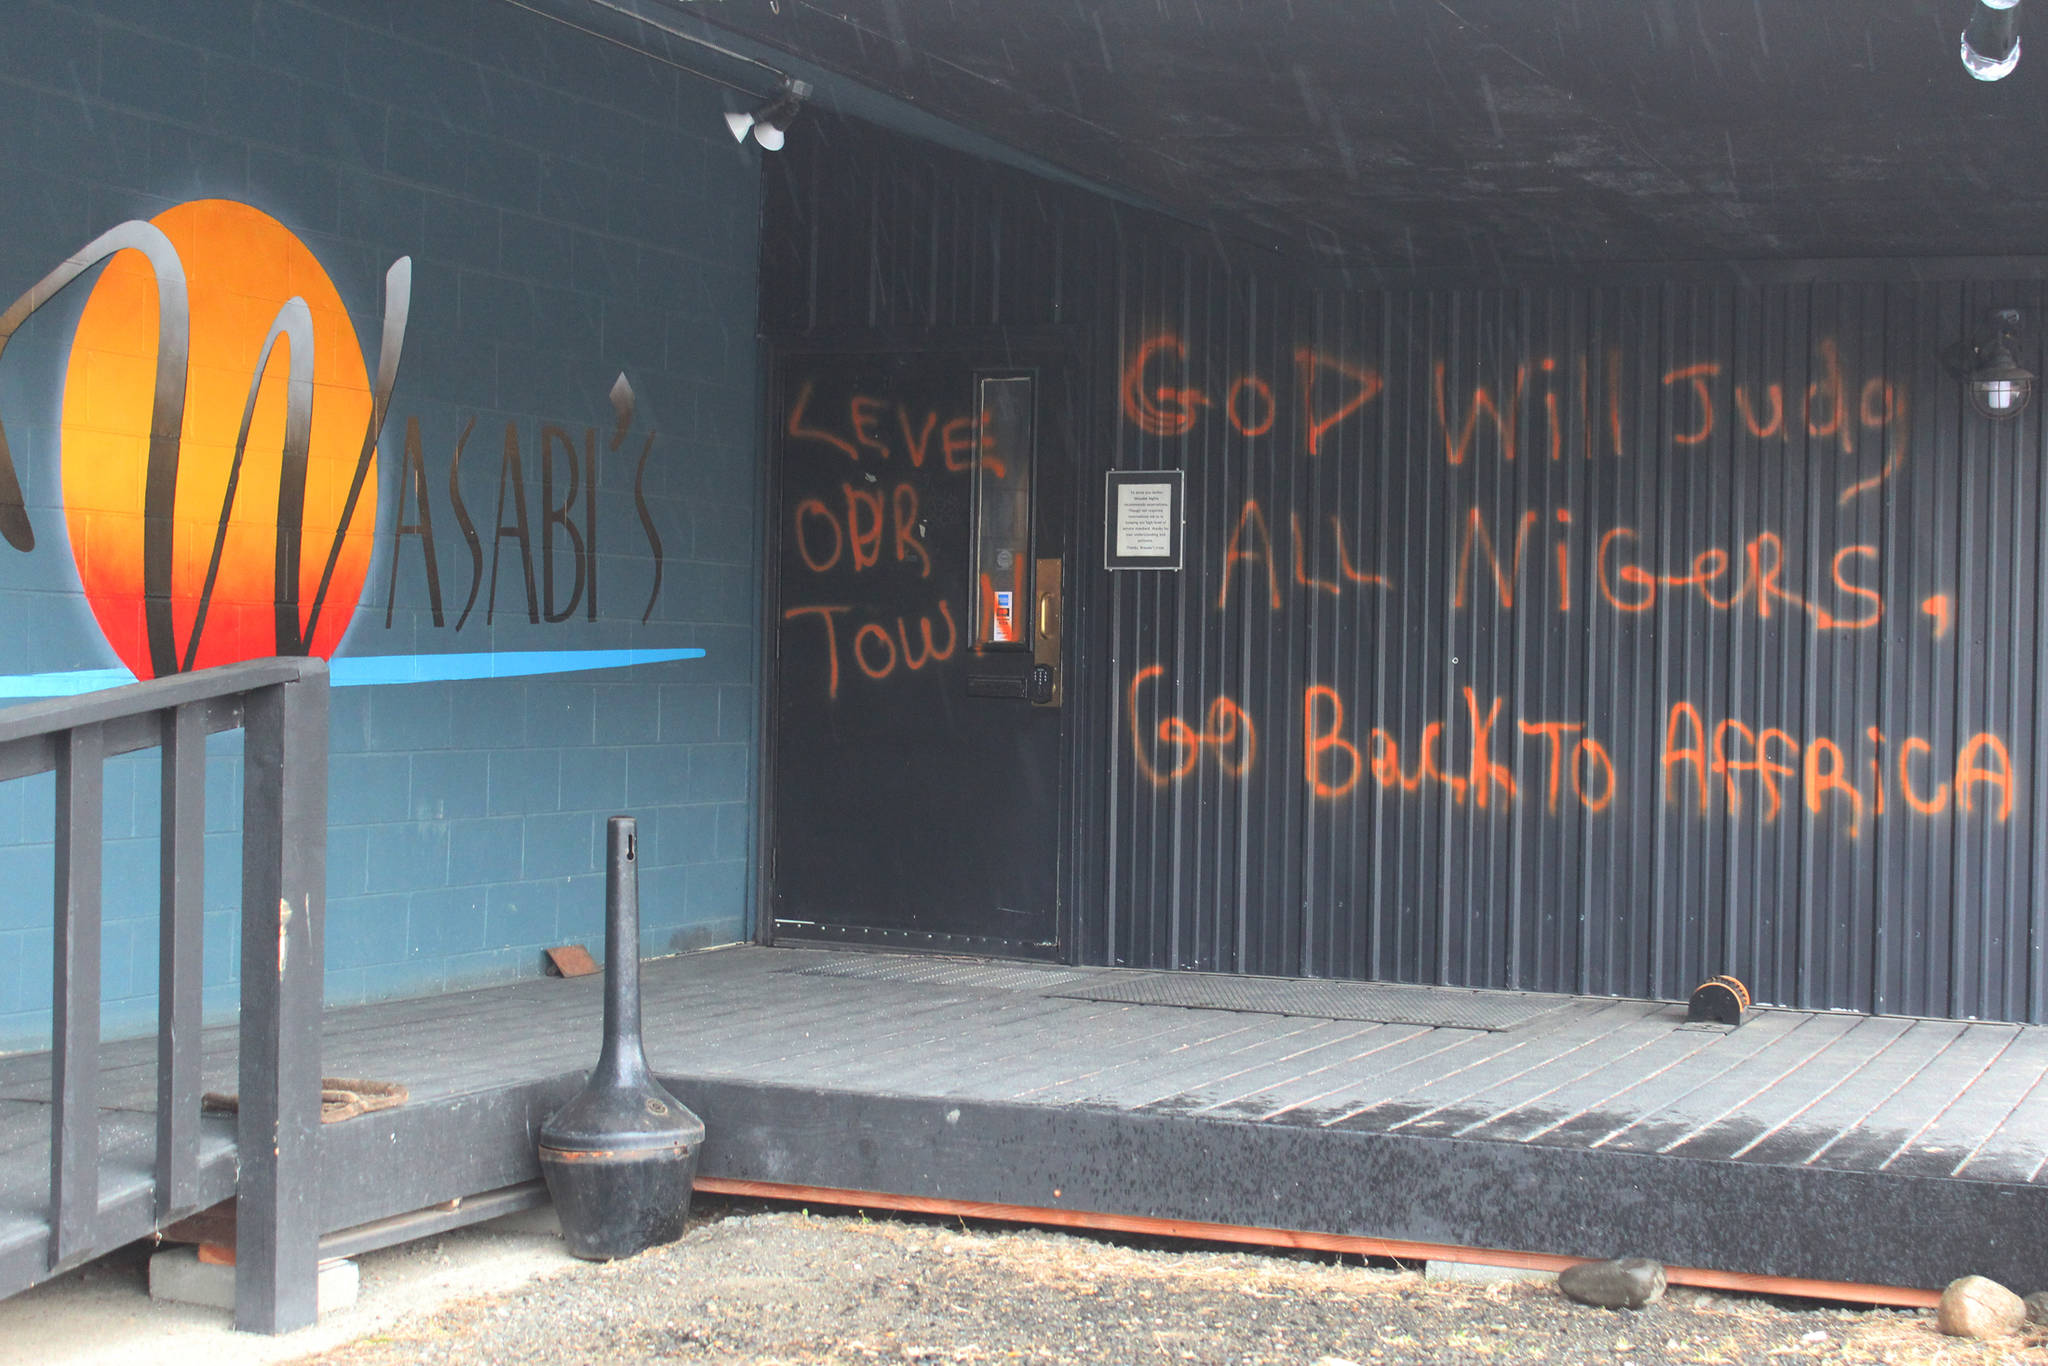 Racist messages are spray painted onto a wall at Wasabi’s Bistro, shown here Thursday, March 21, 2019 just outside of Homer, Alaska. (Photo by Megan Pacer/Homer News)